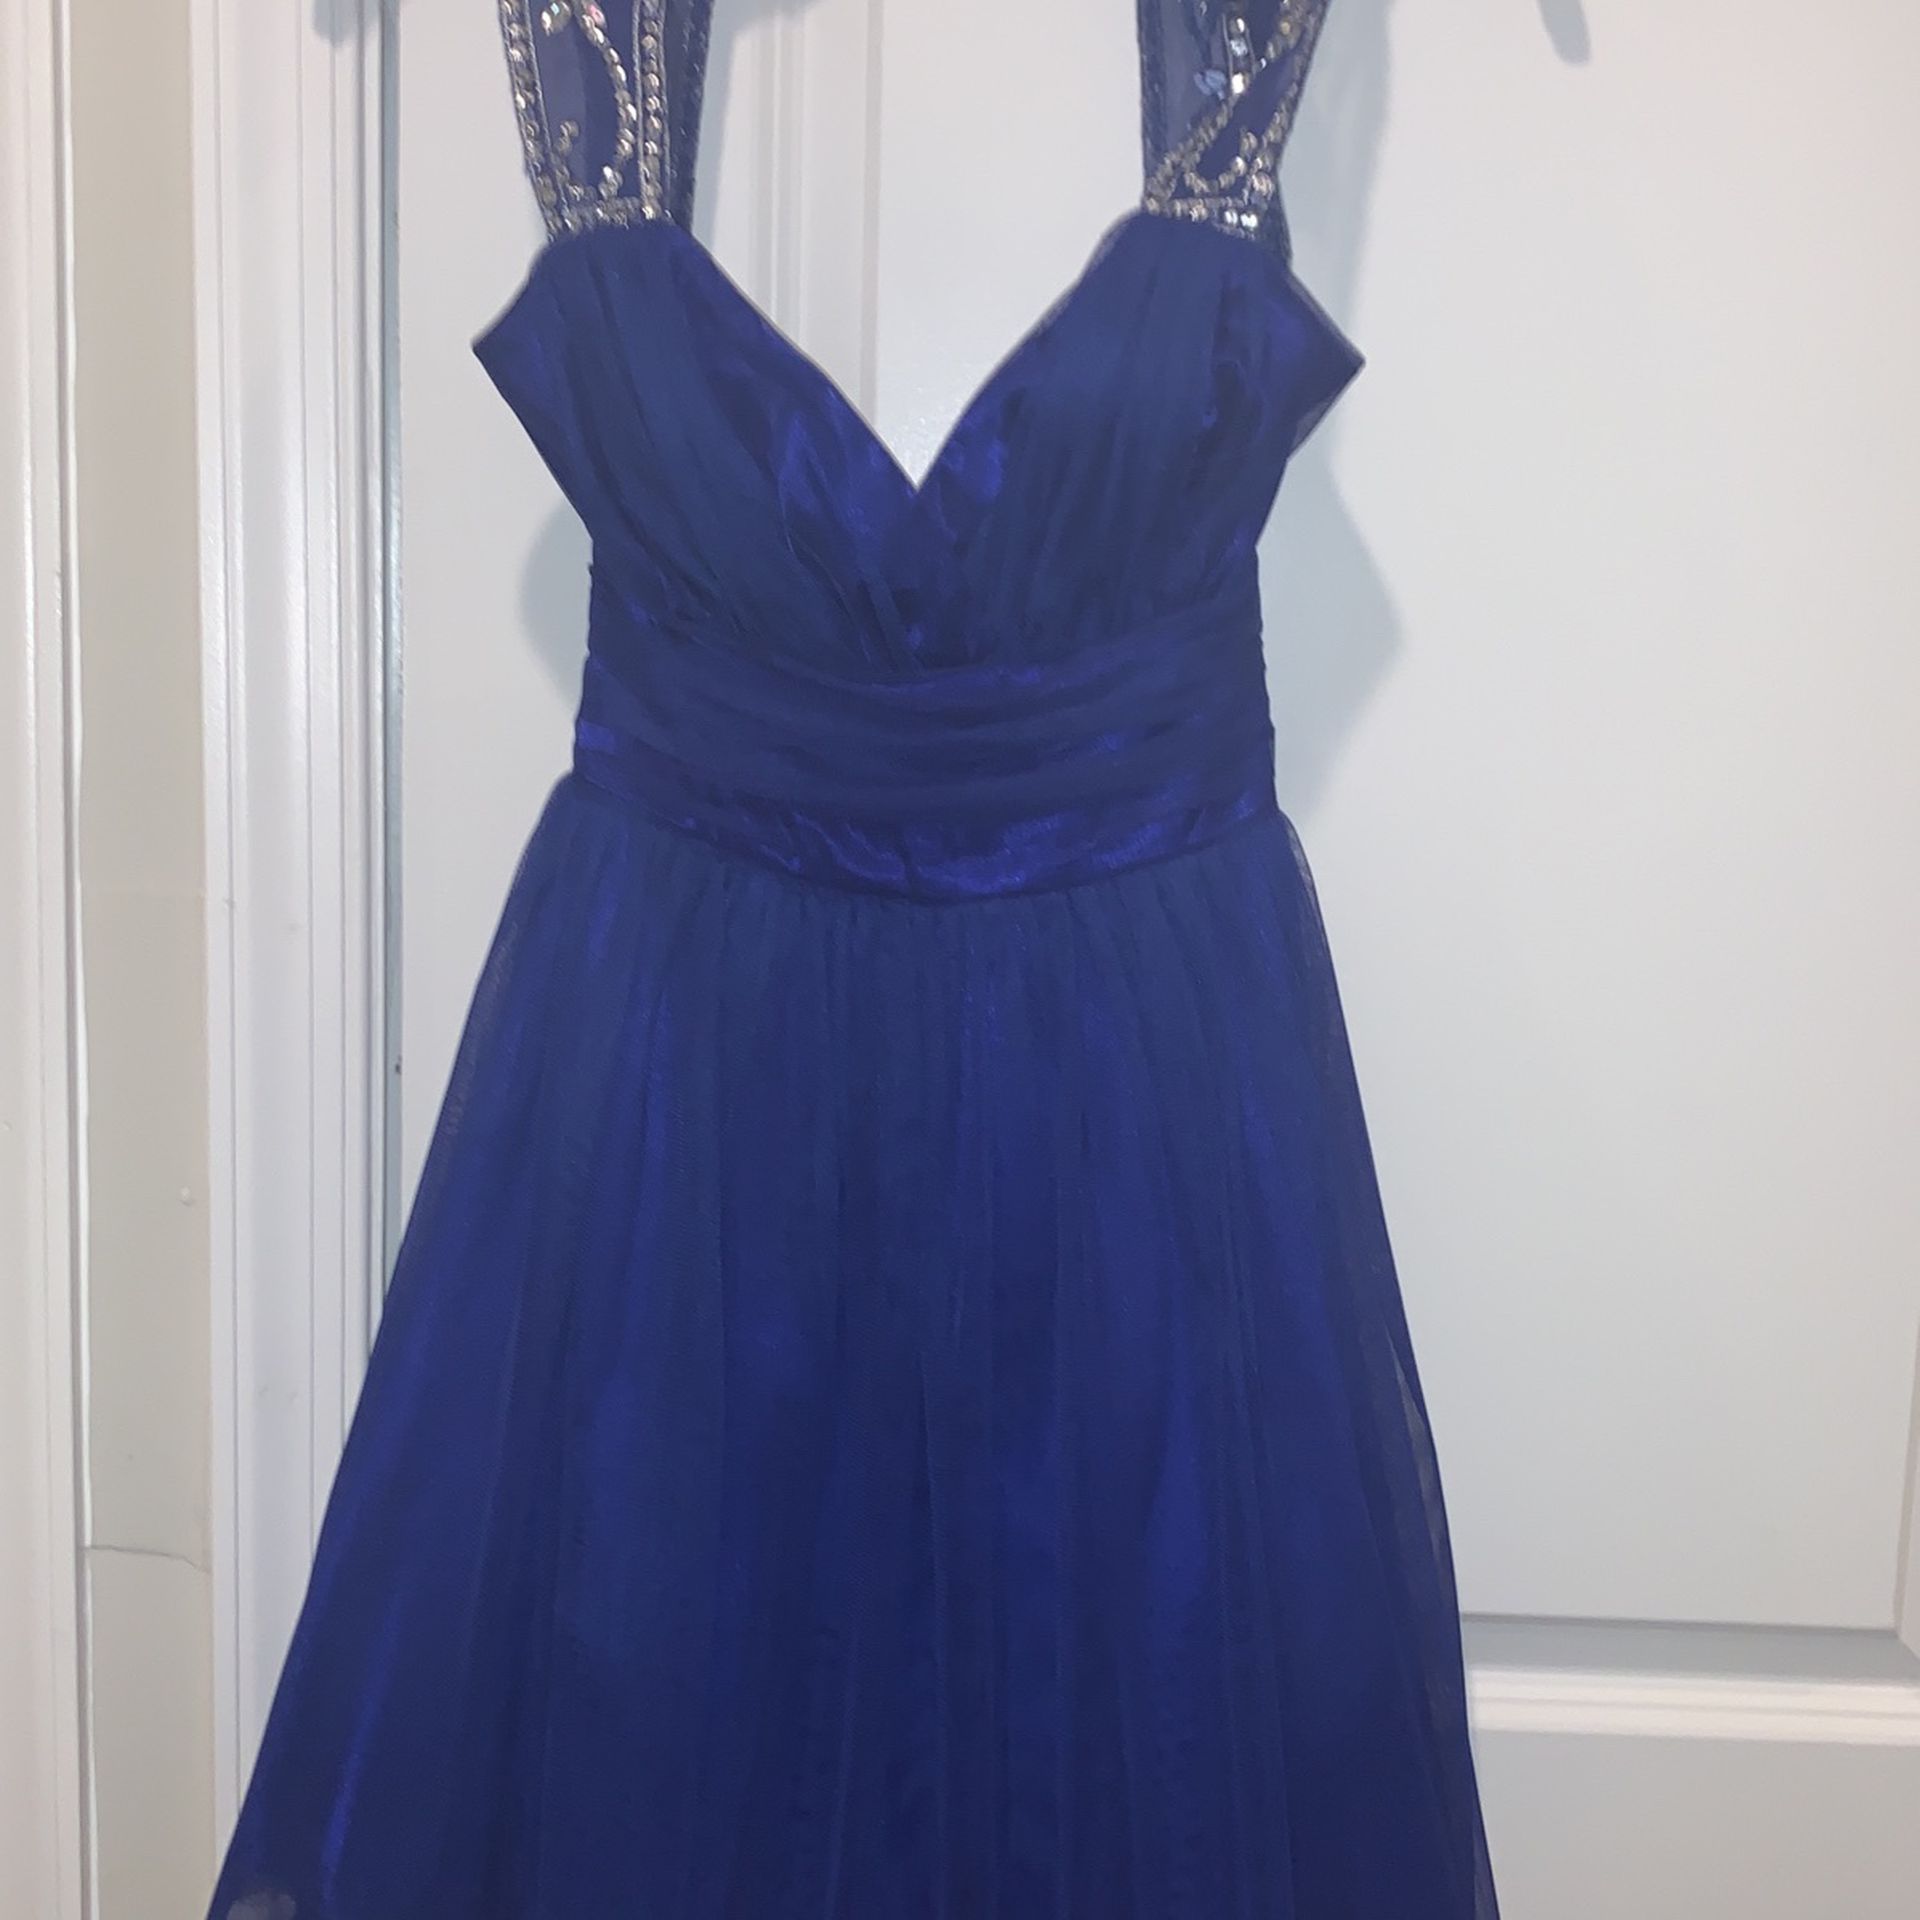 Blue Party/prom Dress